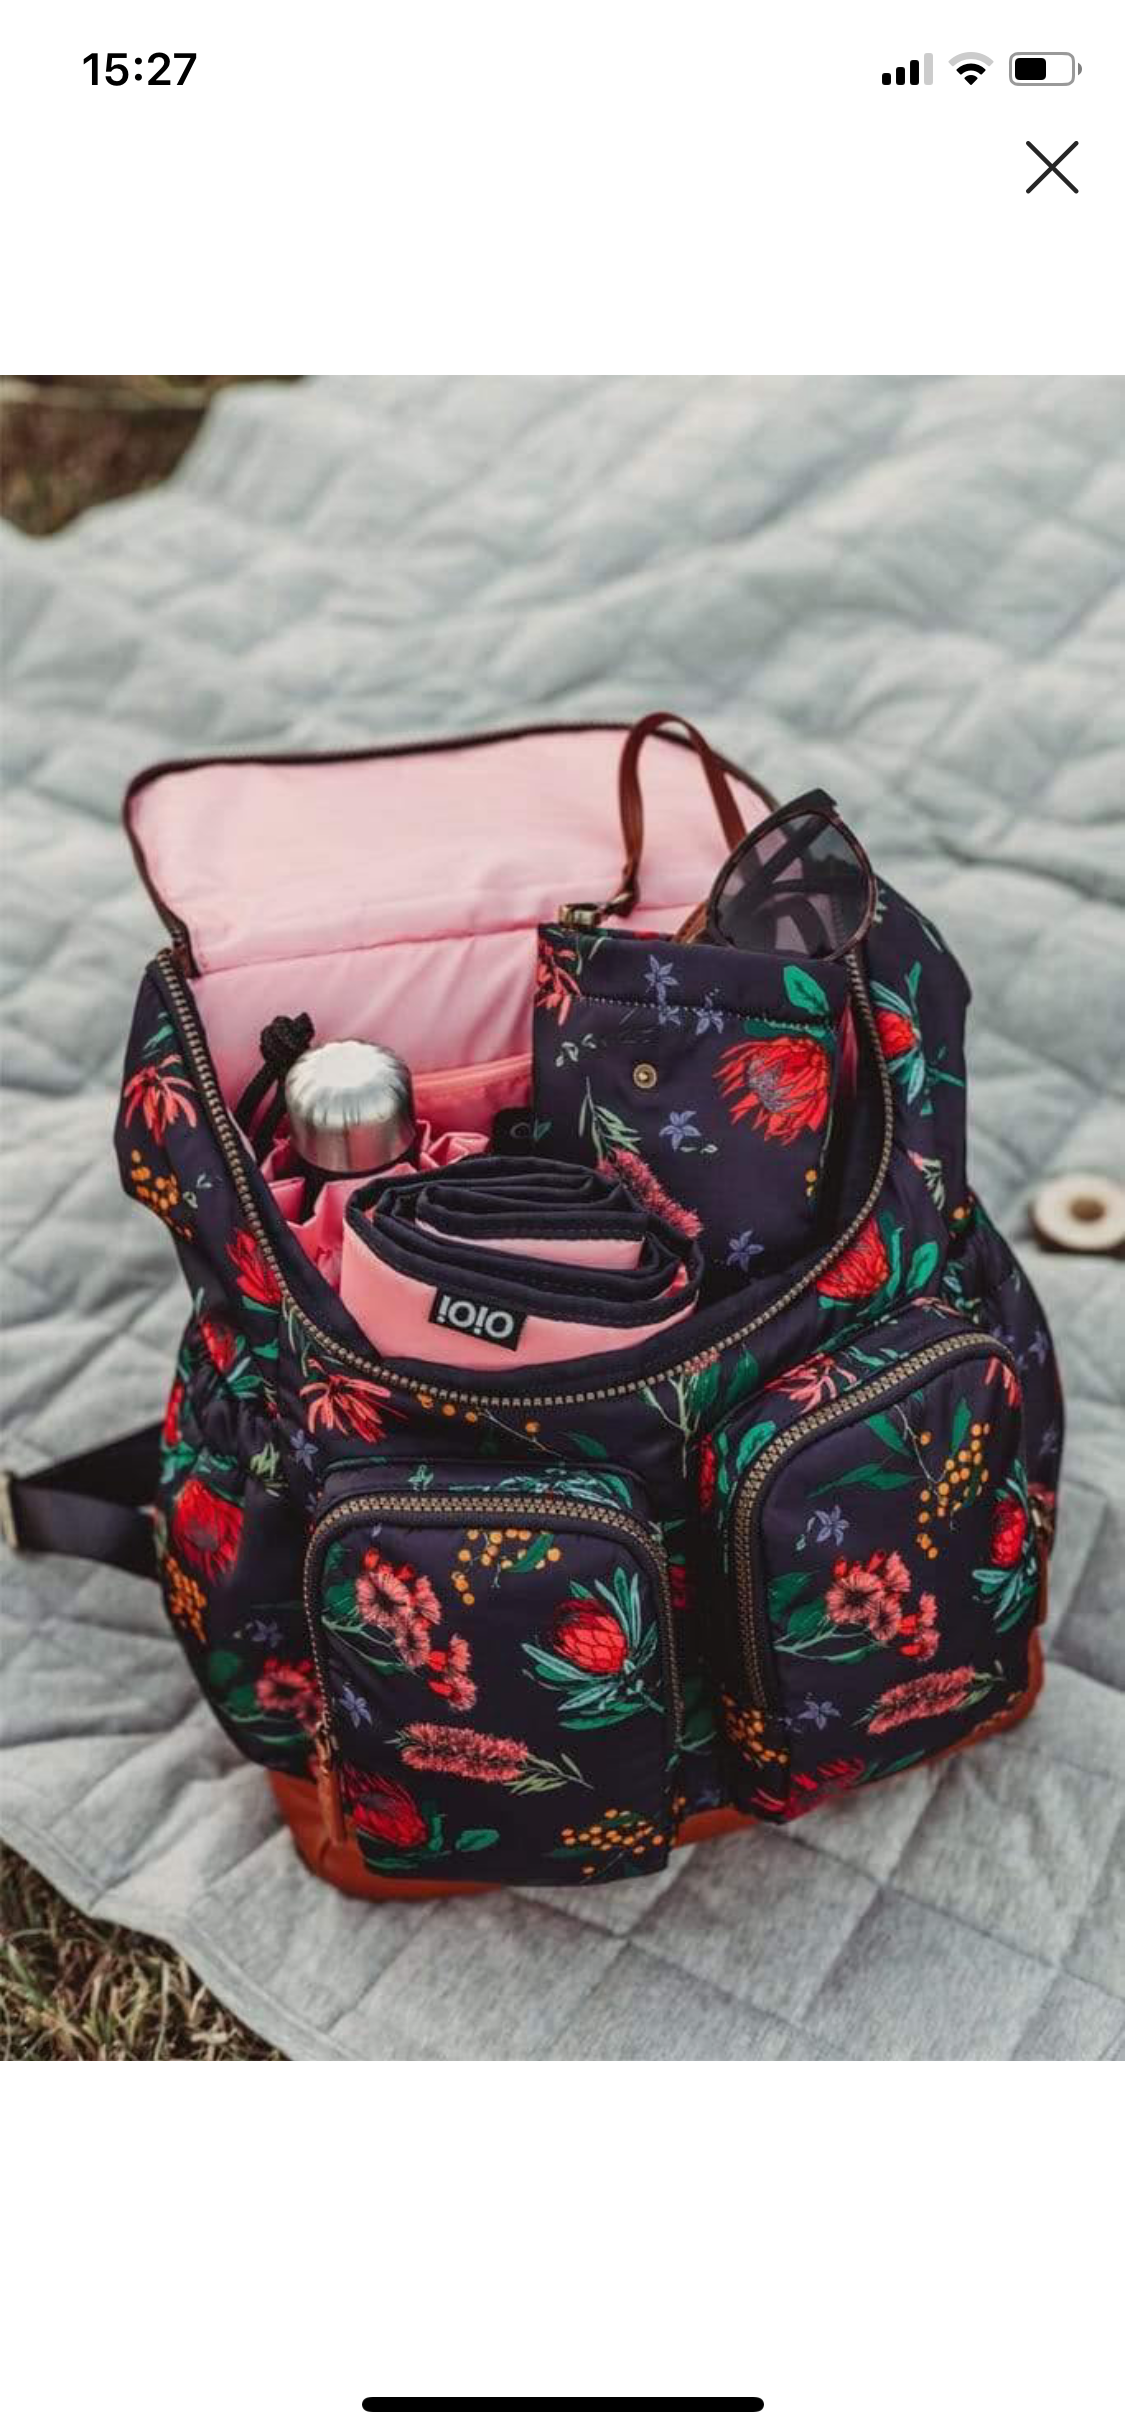 OiOi  Nappy Backpack - Botanical Floral